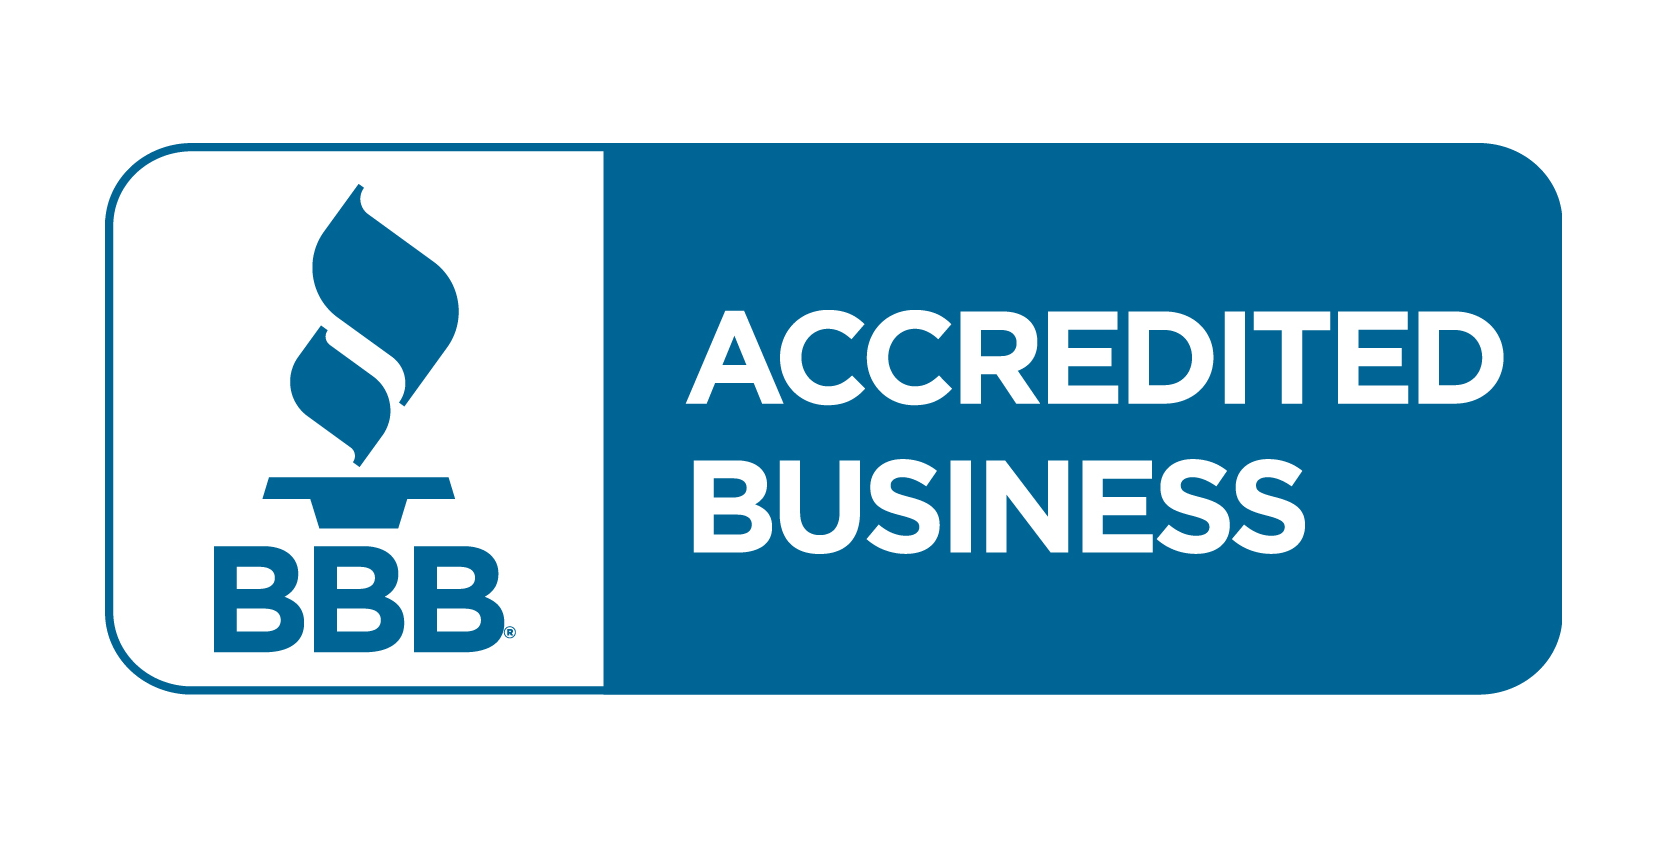 BBB Accredited Business Austin, TX